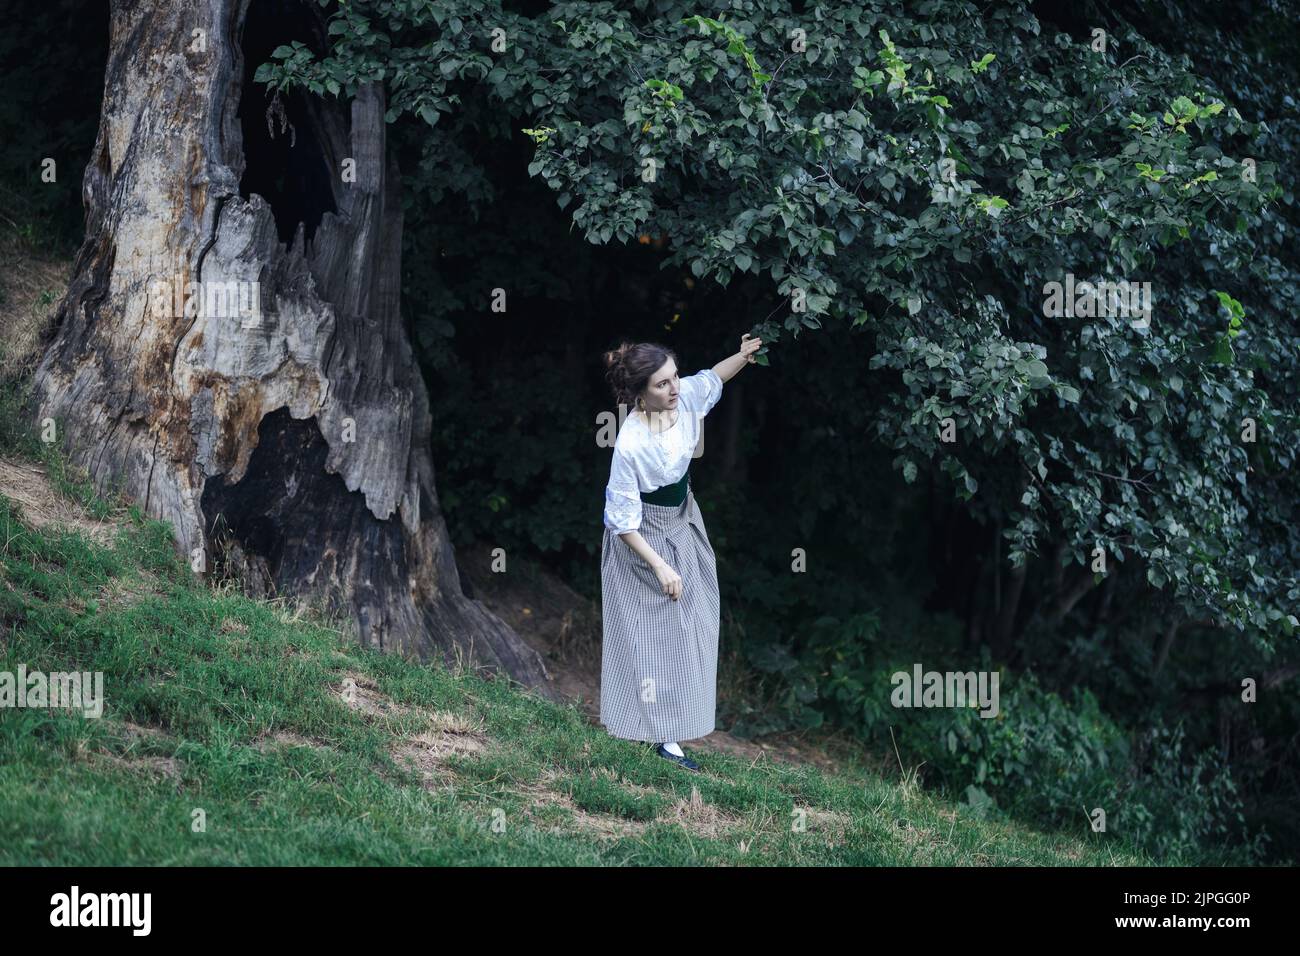 Portrait of a young slender woman in a 1910s costume. A girl stands under an old damaged tree in a mysterious place Stock Photo